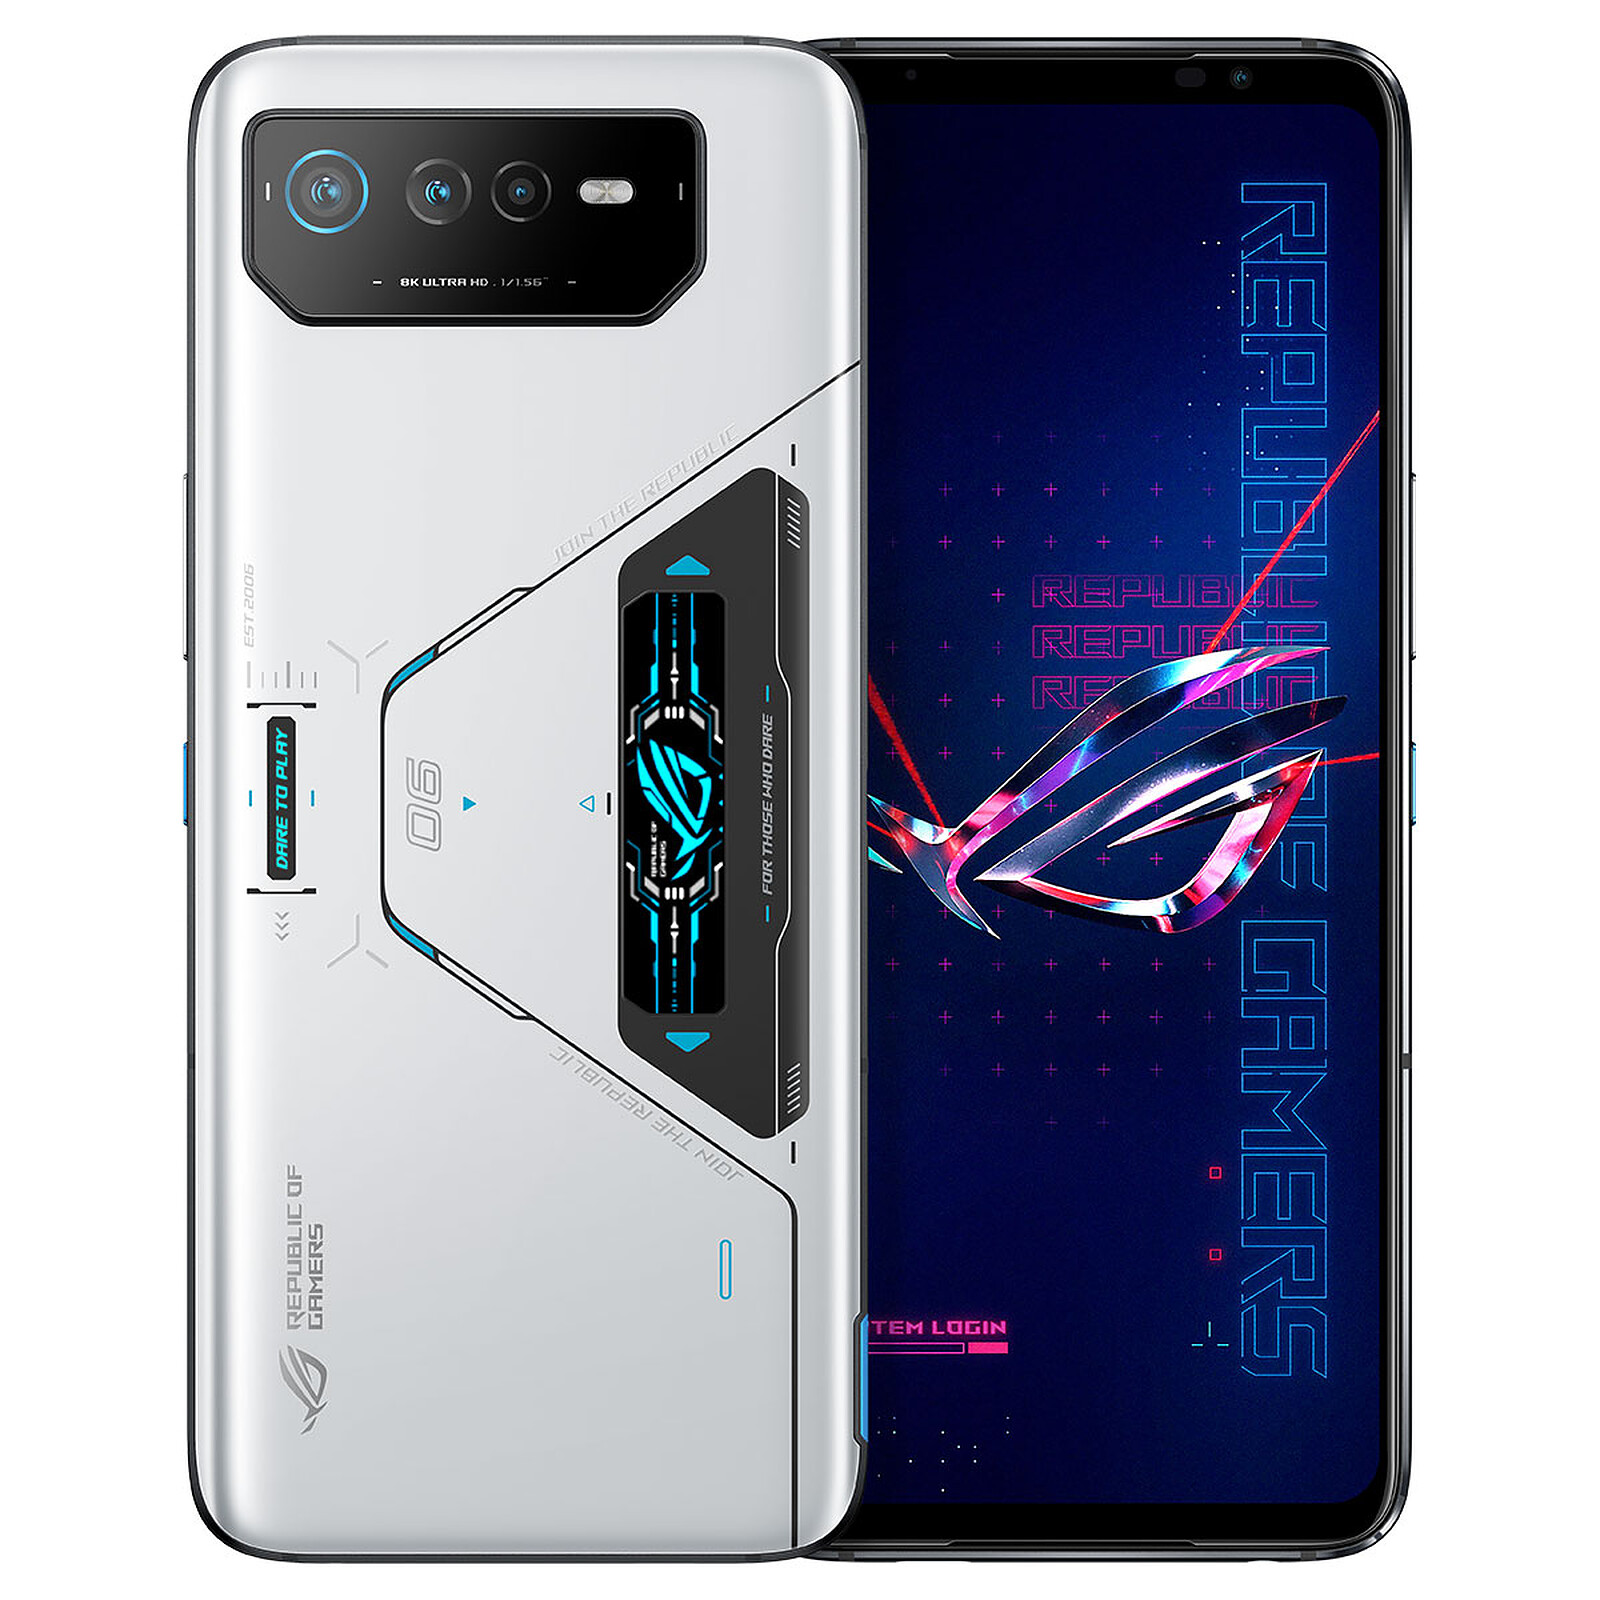 ASUS ROG Phone 6 Pro White (18 GB / 512 GB) - Mobile phone & smartphone -  LDLC 3-year warranty